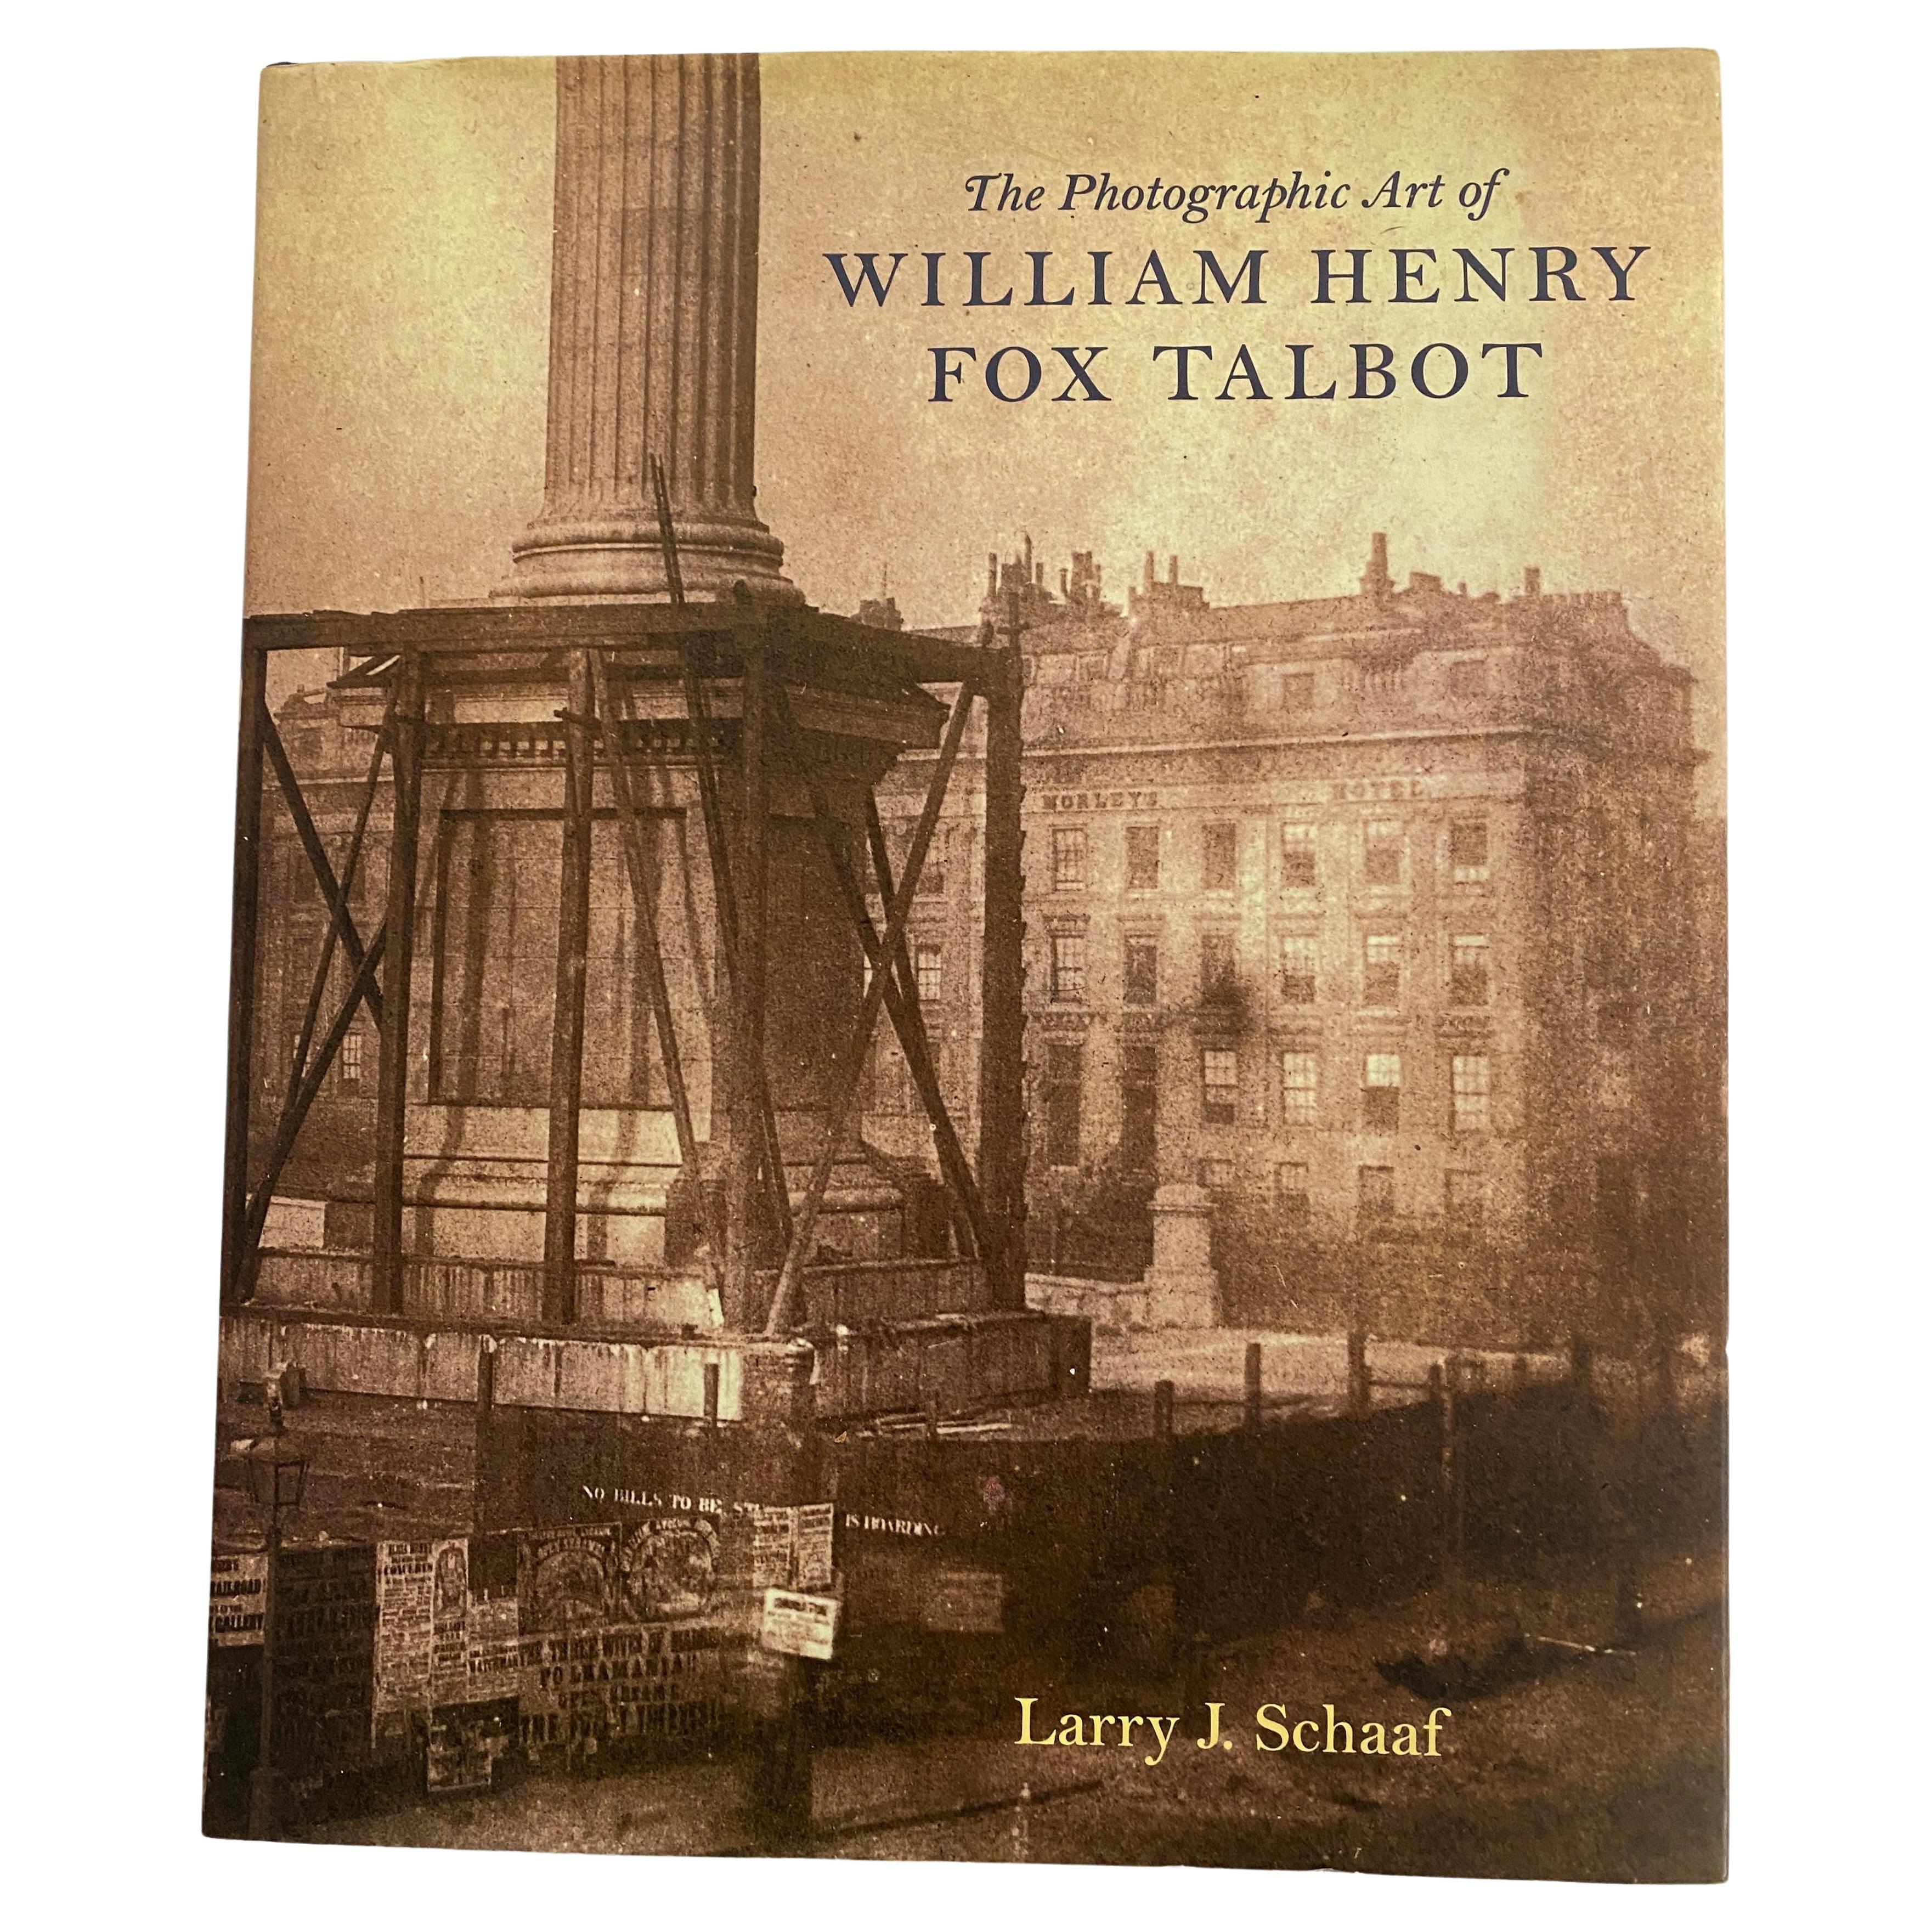 The Photographic Art of William Henry Fox Talbot by Larry J. Schaaf (Book)